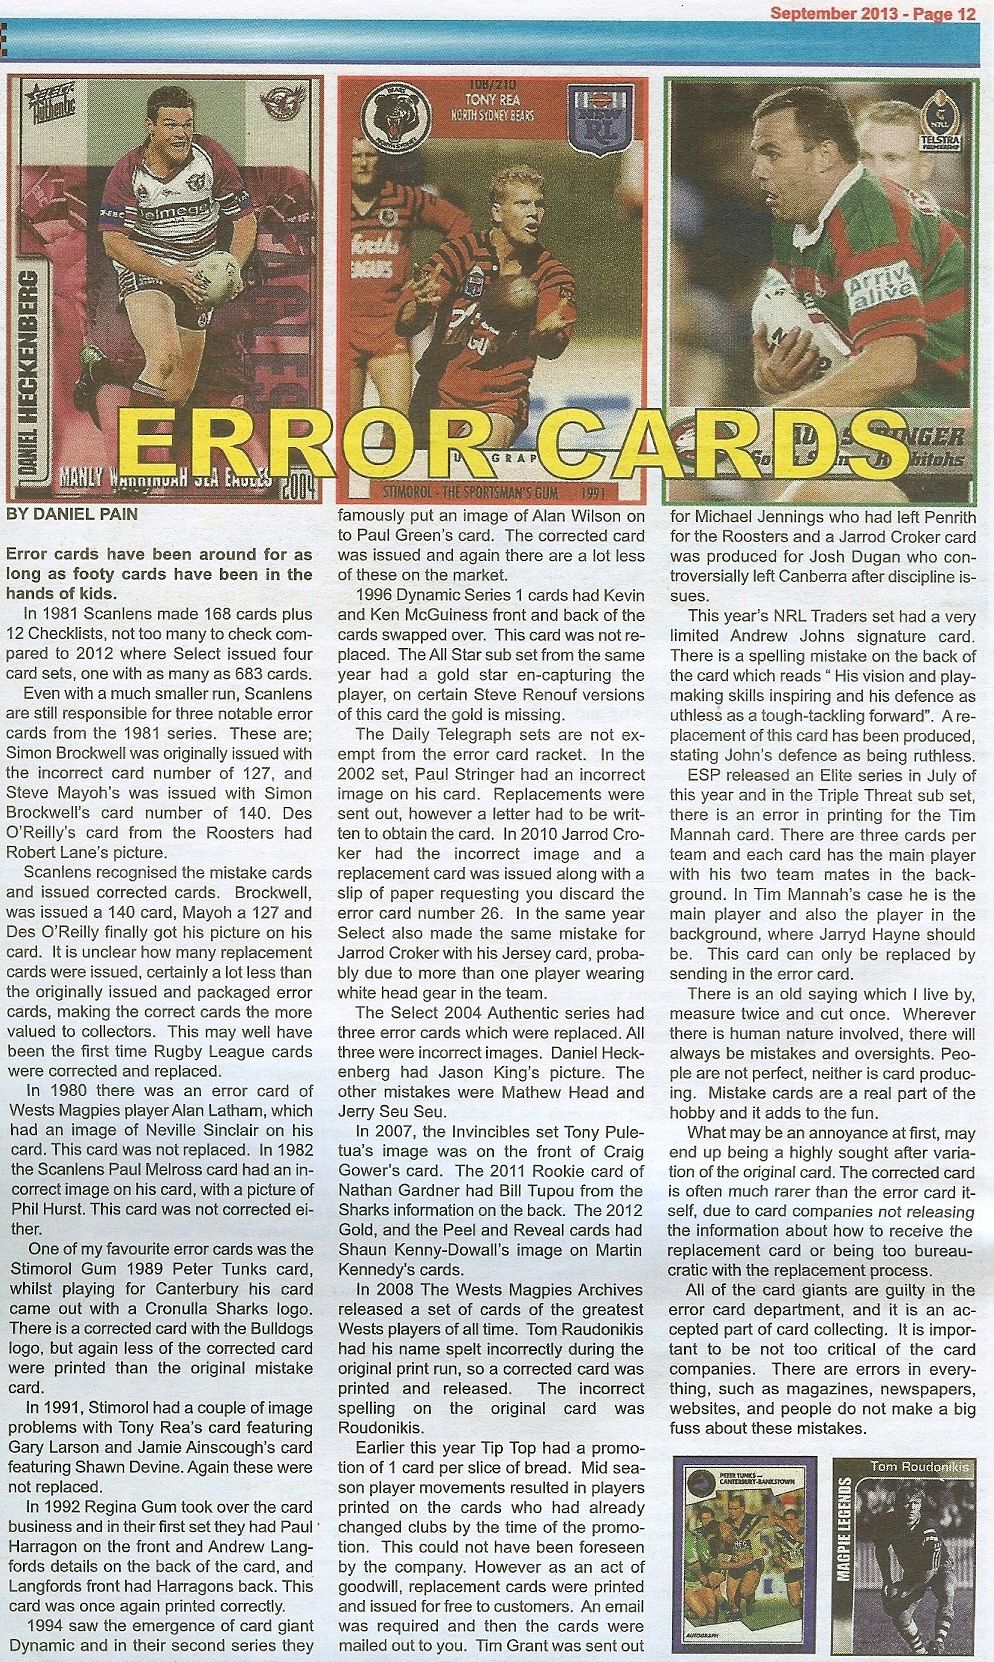 rugby league review article error cards0001.jpg